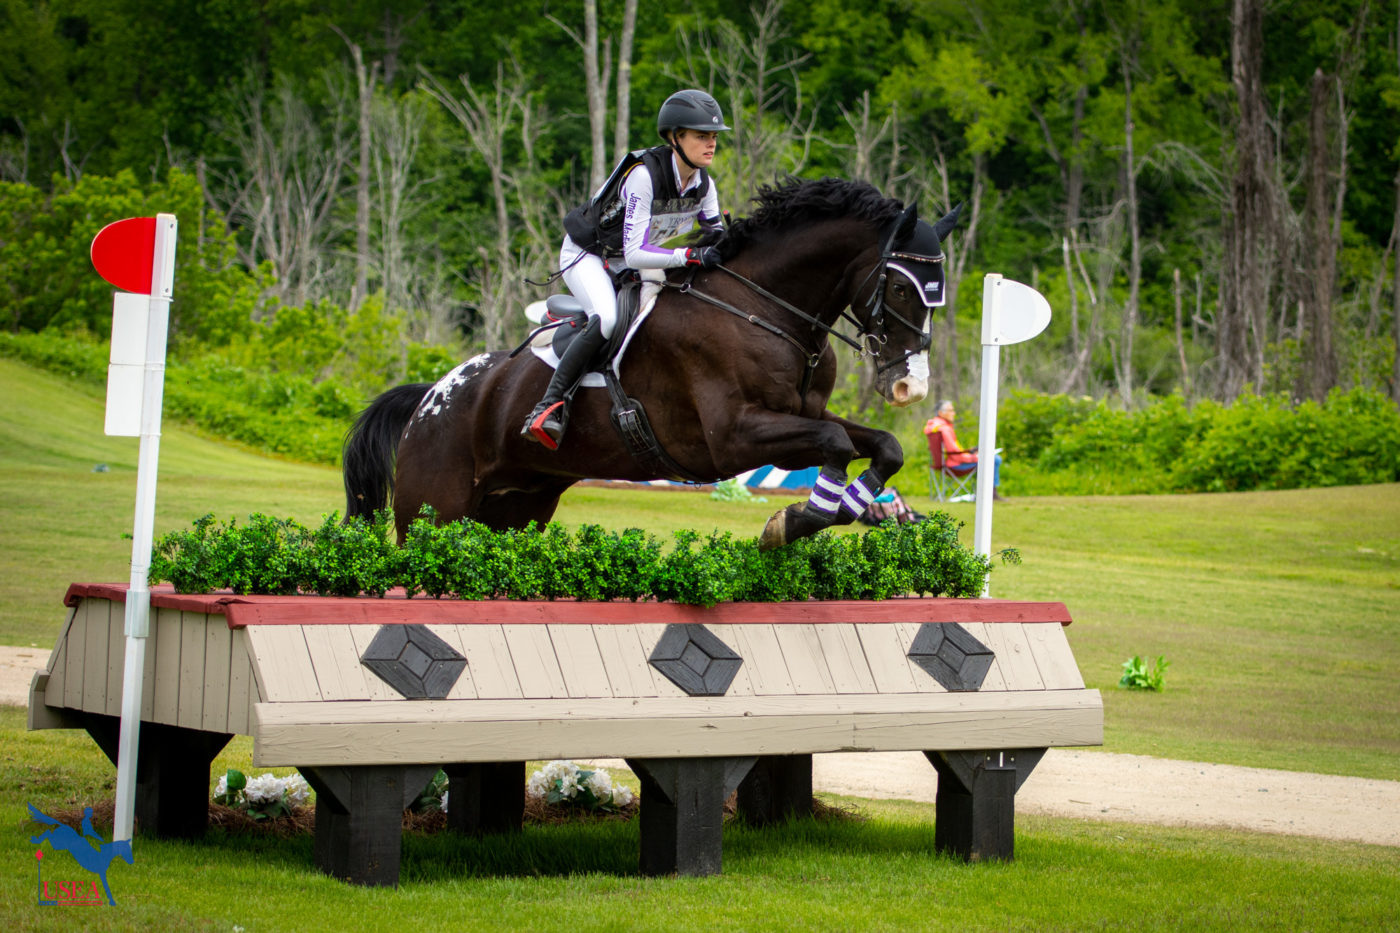 Elise Bell and FAE Salty Dog jumped well for James Madison University. USEA/Shelby Allen photo